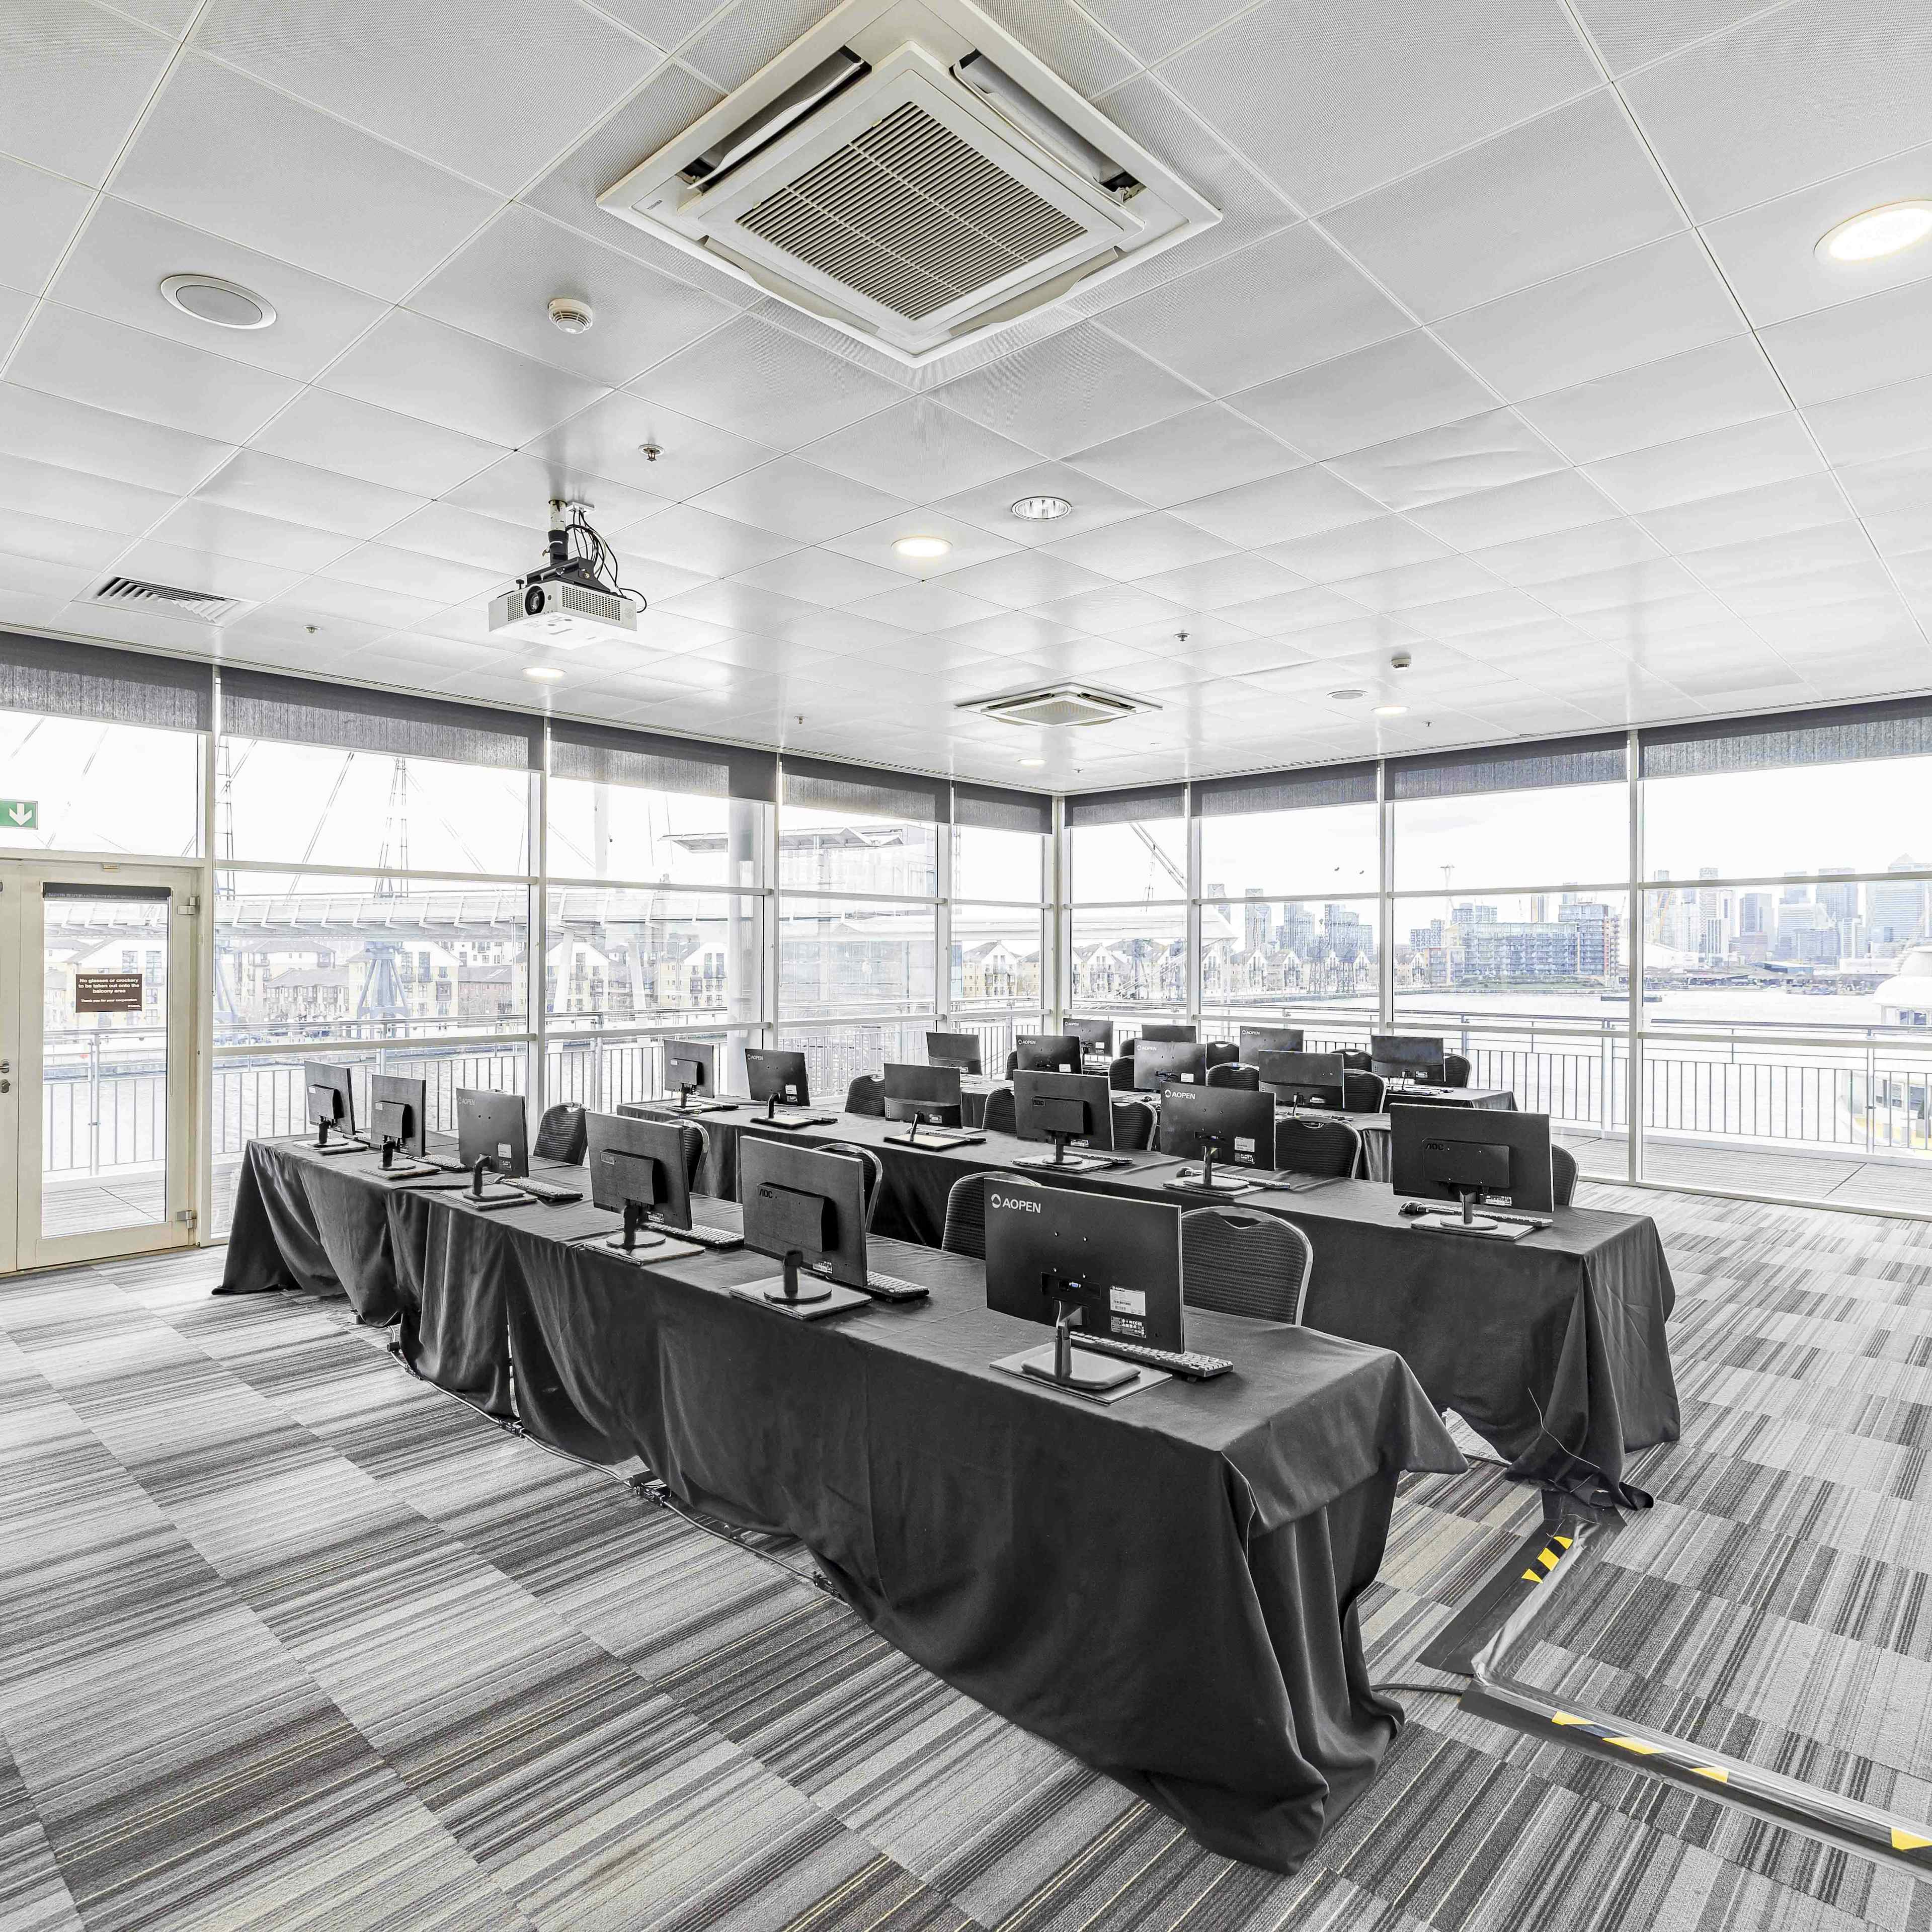 London ExCeL IT Training Rooms - IT Training Rooms image 2